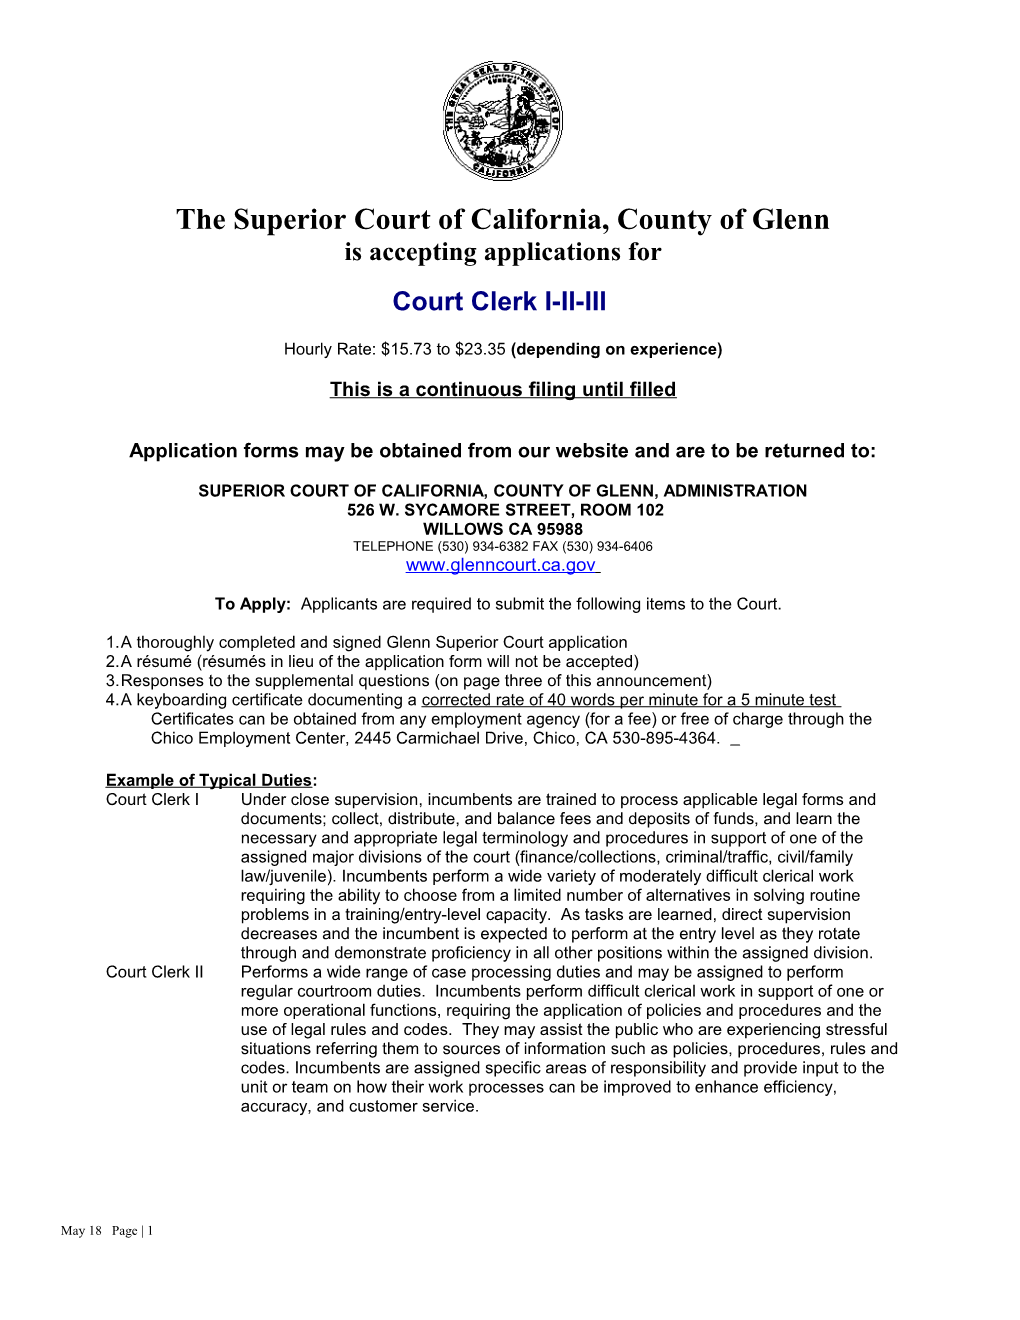 The Superior Court of California, County of Glenn